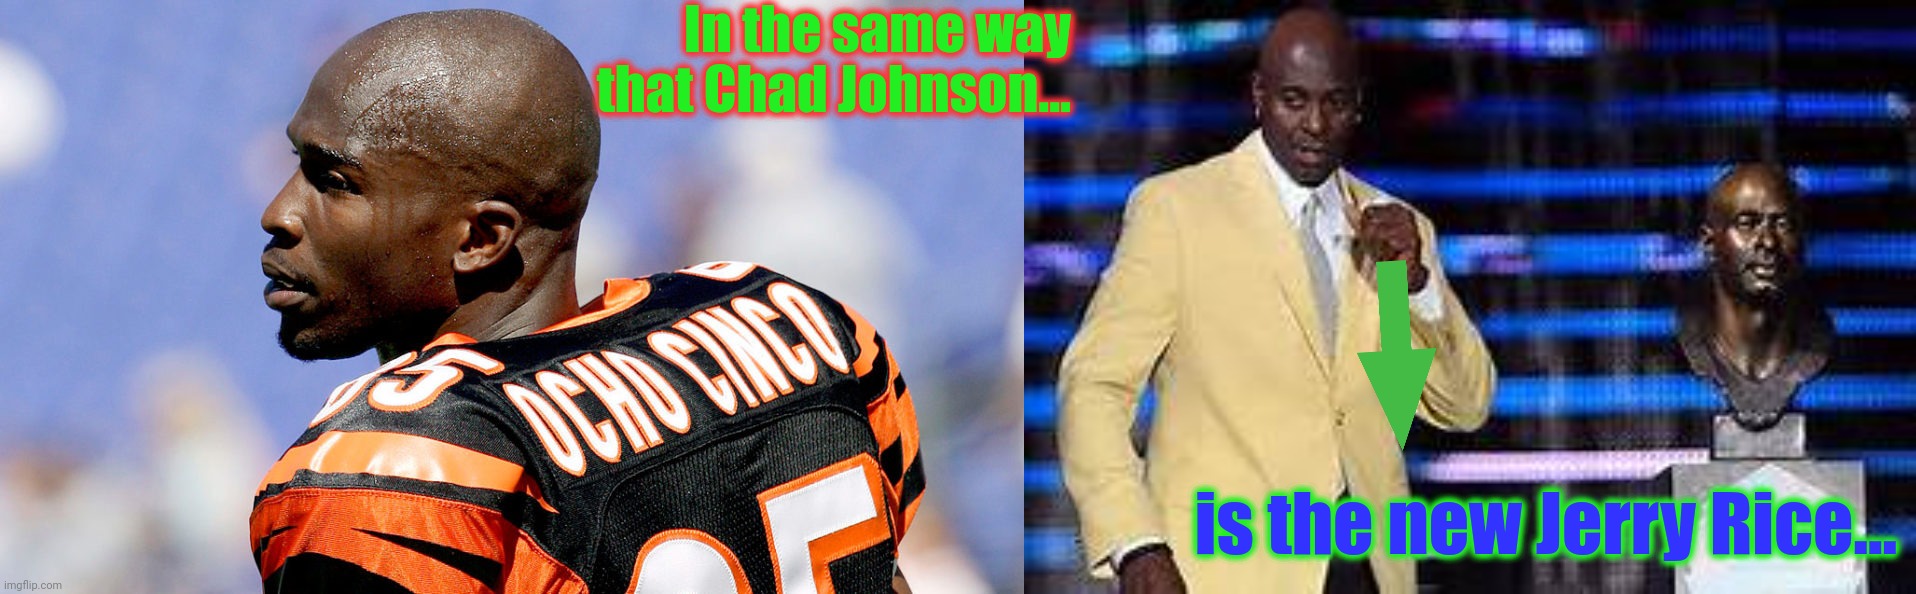 In the same way that Chad Johnson... is the new Jerry Rice... | image tagged in jerry rice | made w/ Imgflip meme maker